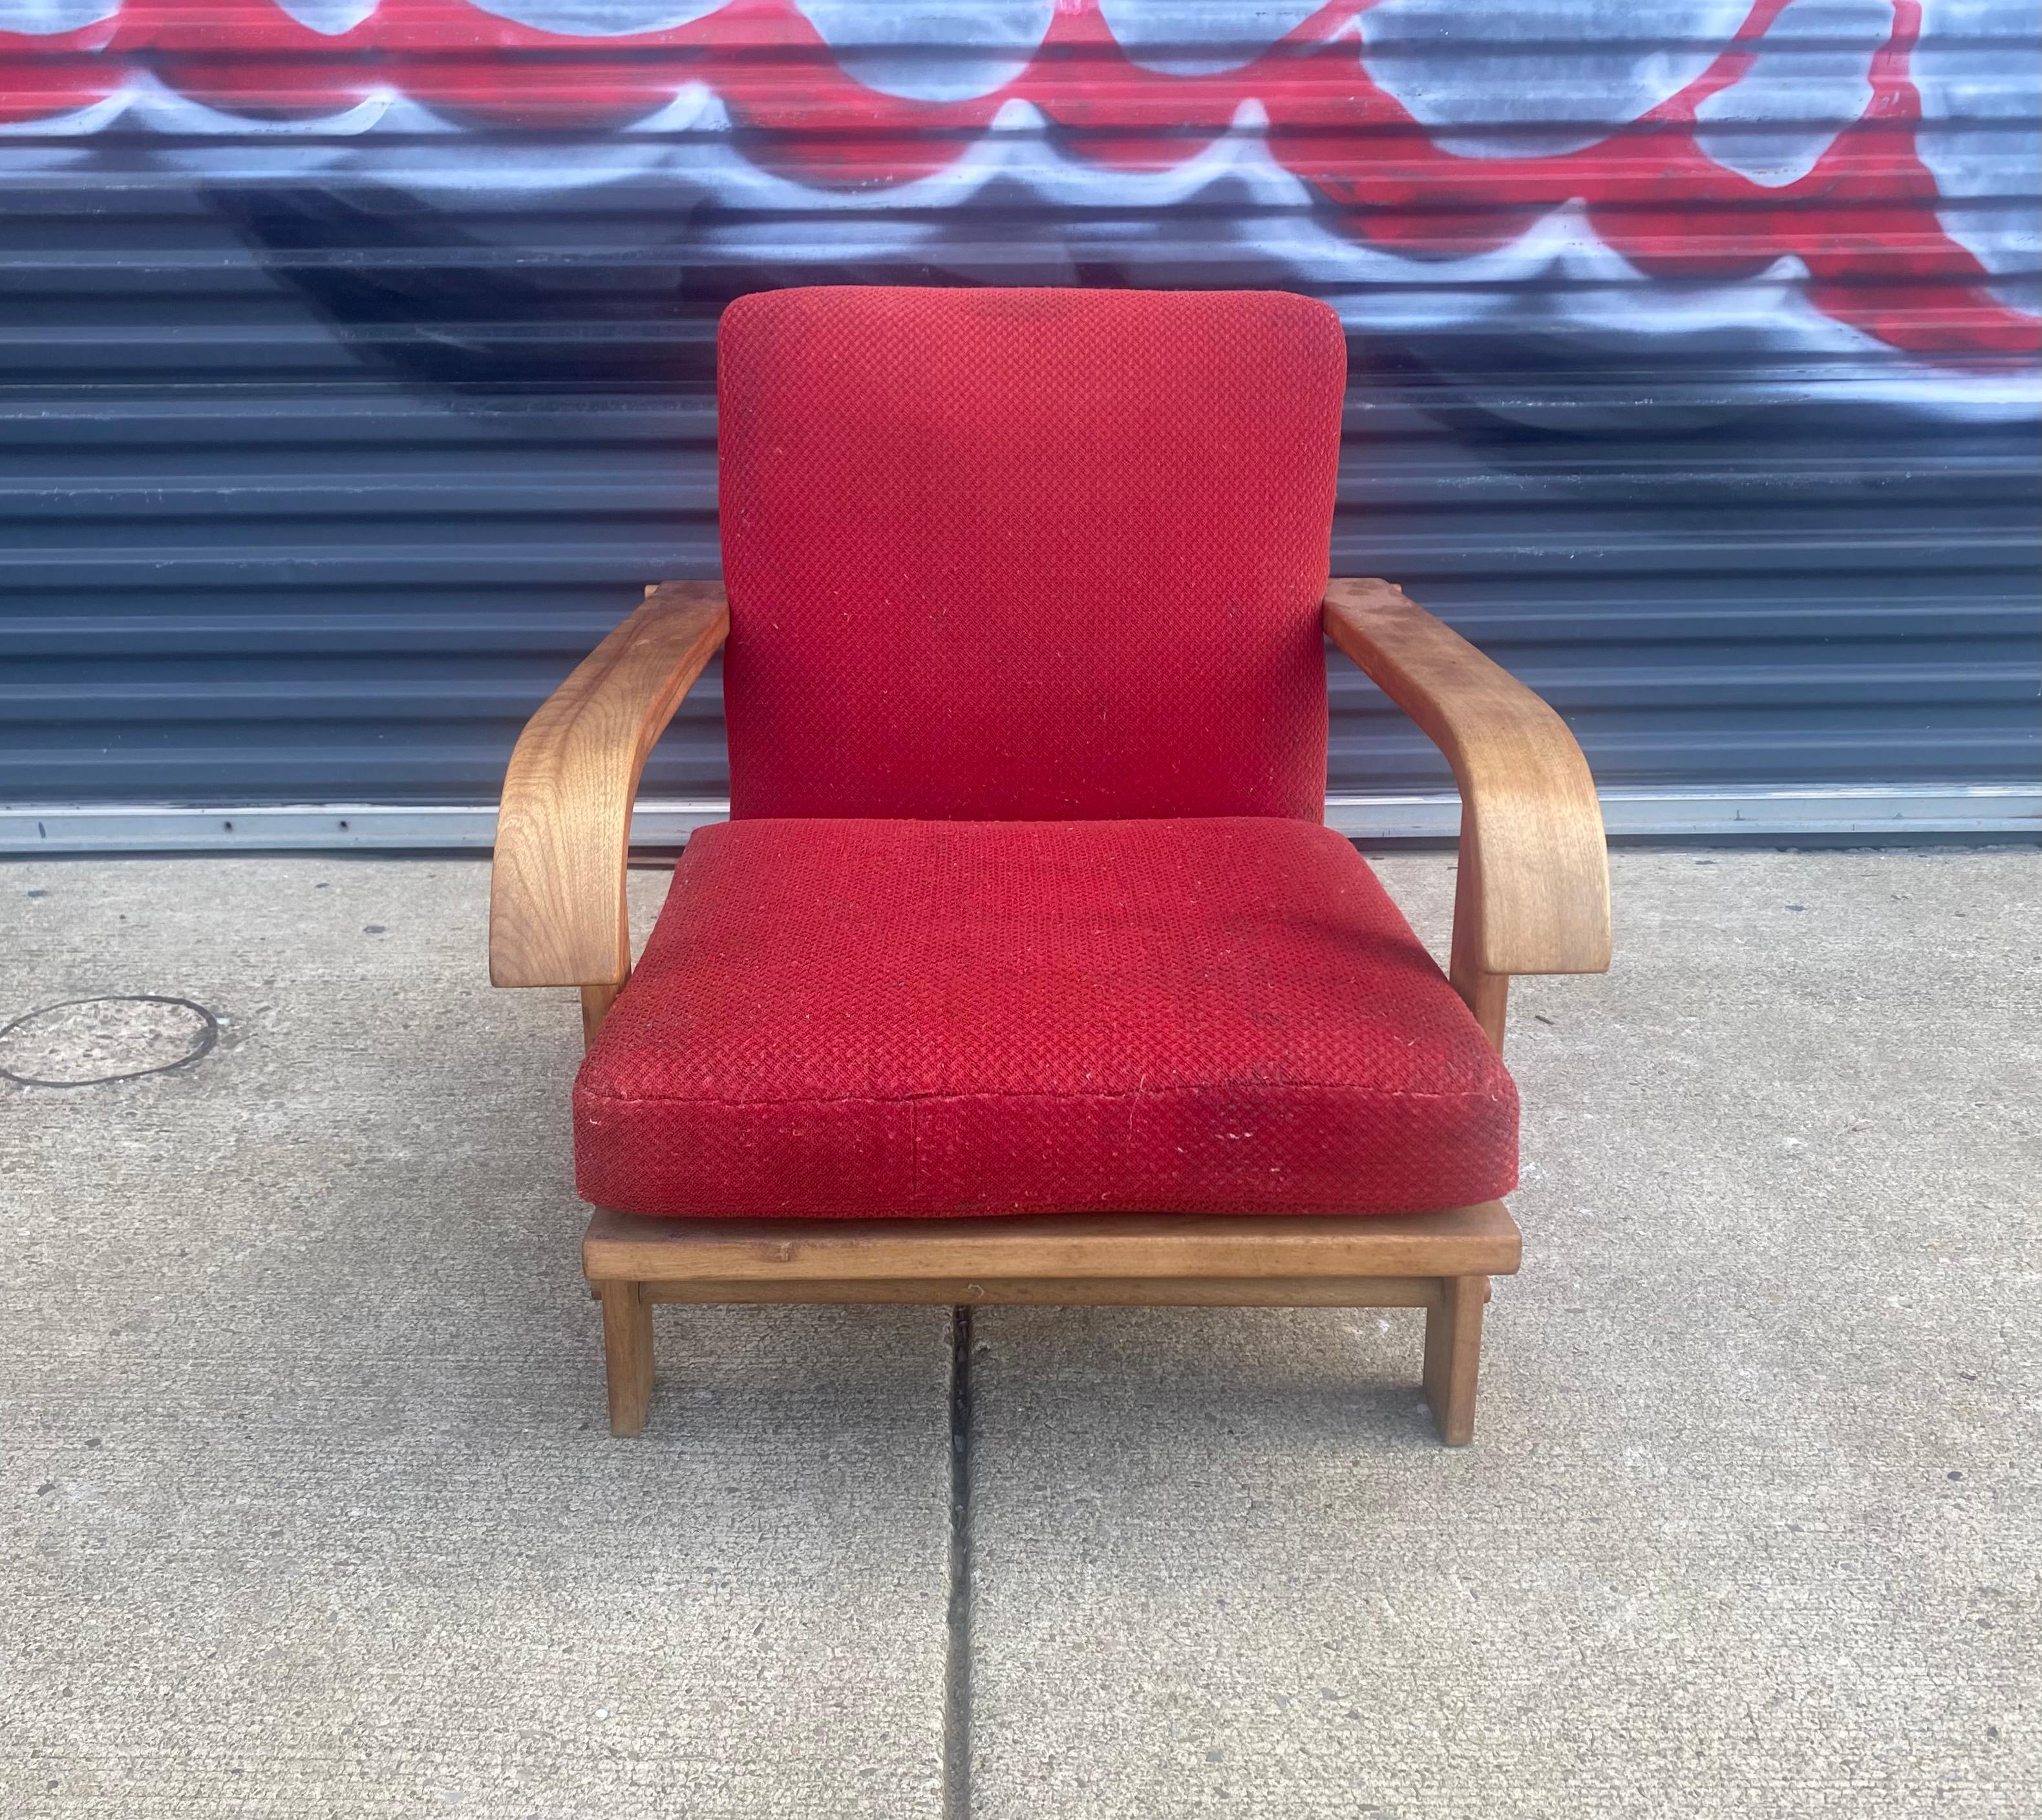 Mid-20th Century Russel Wright Easy Chair for Conant Ball's, American Modern, 1935 For Sale